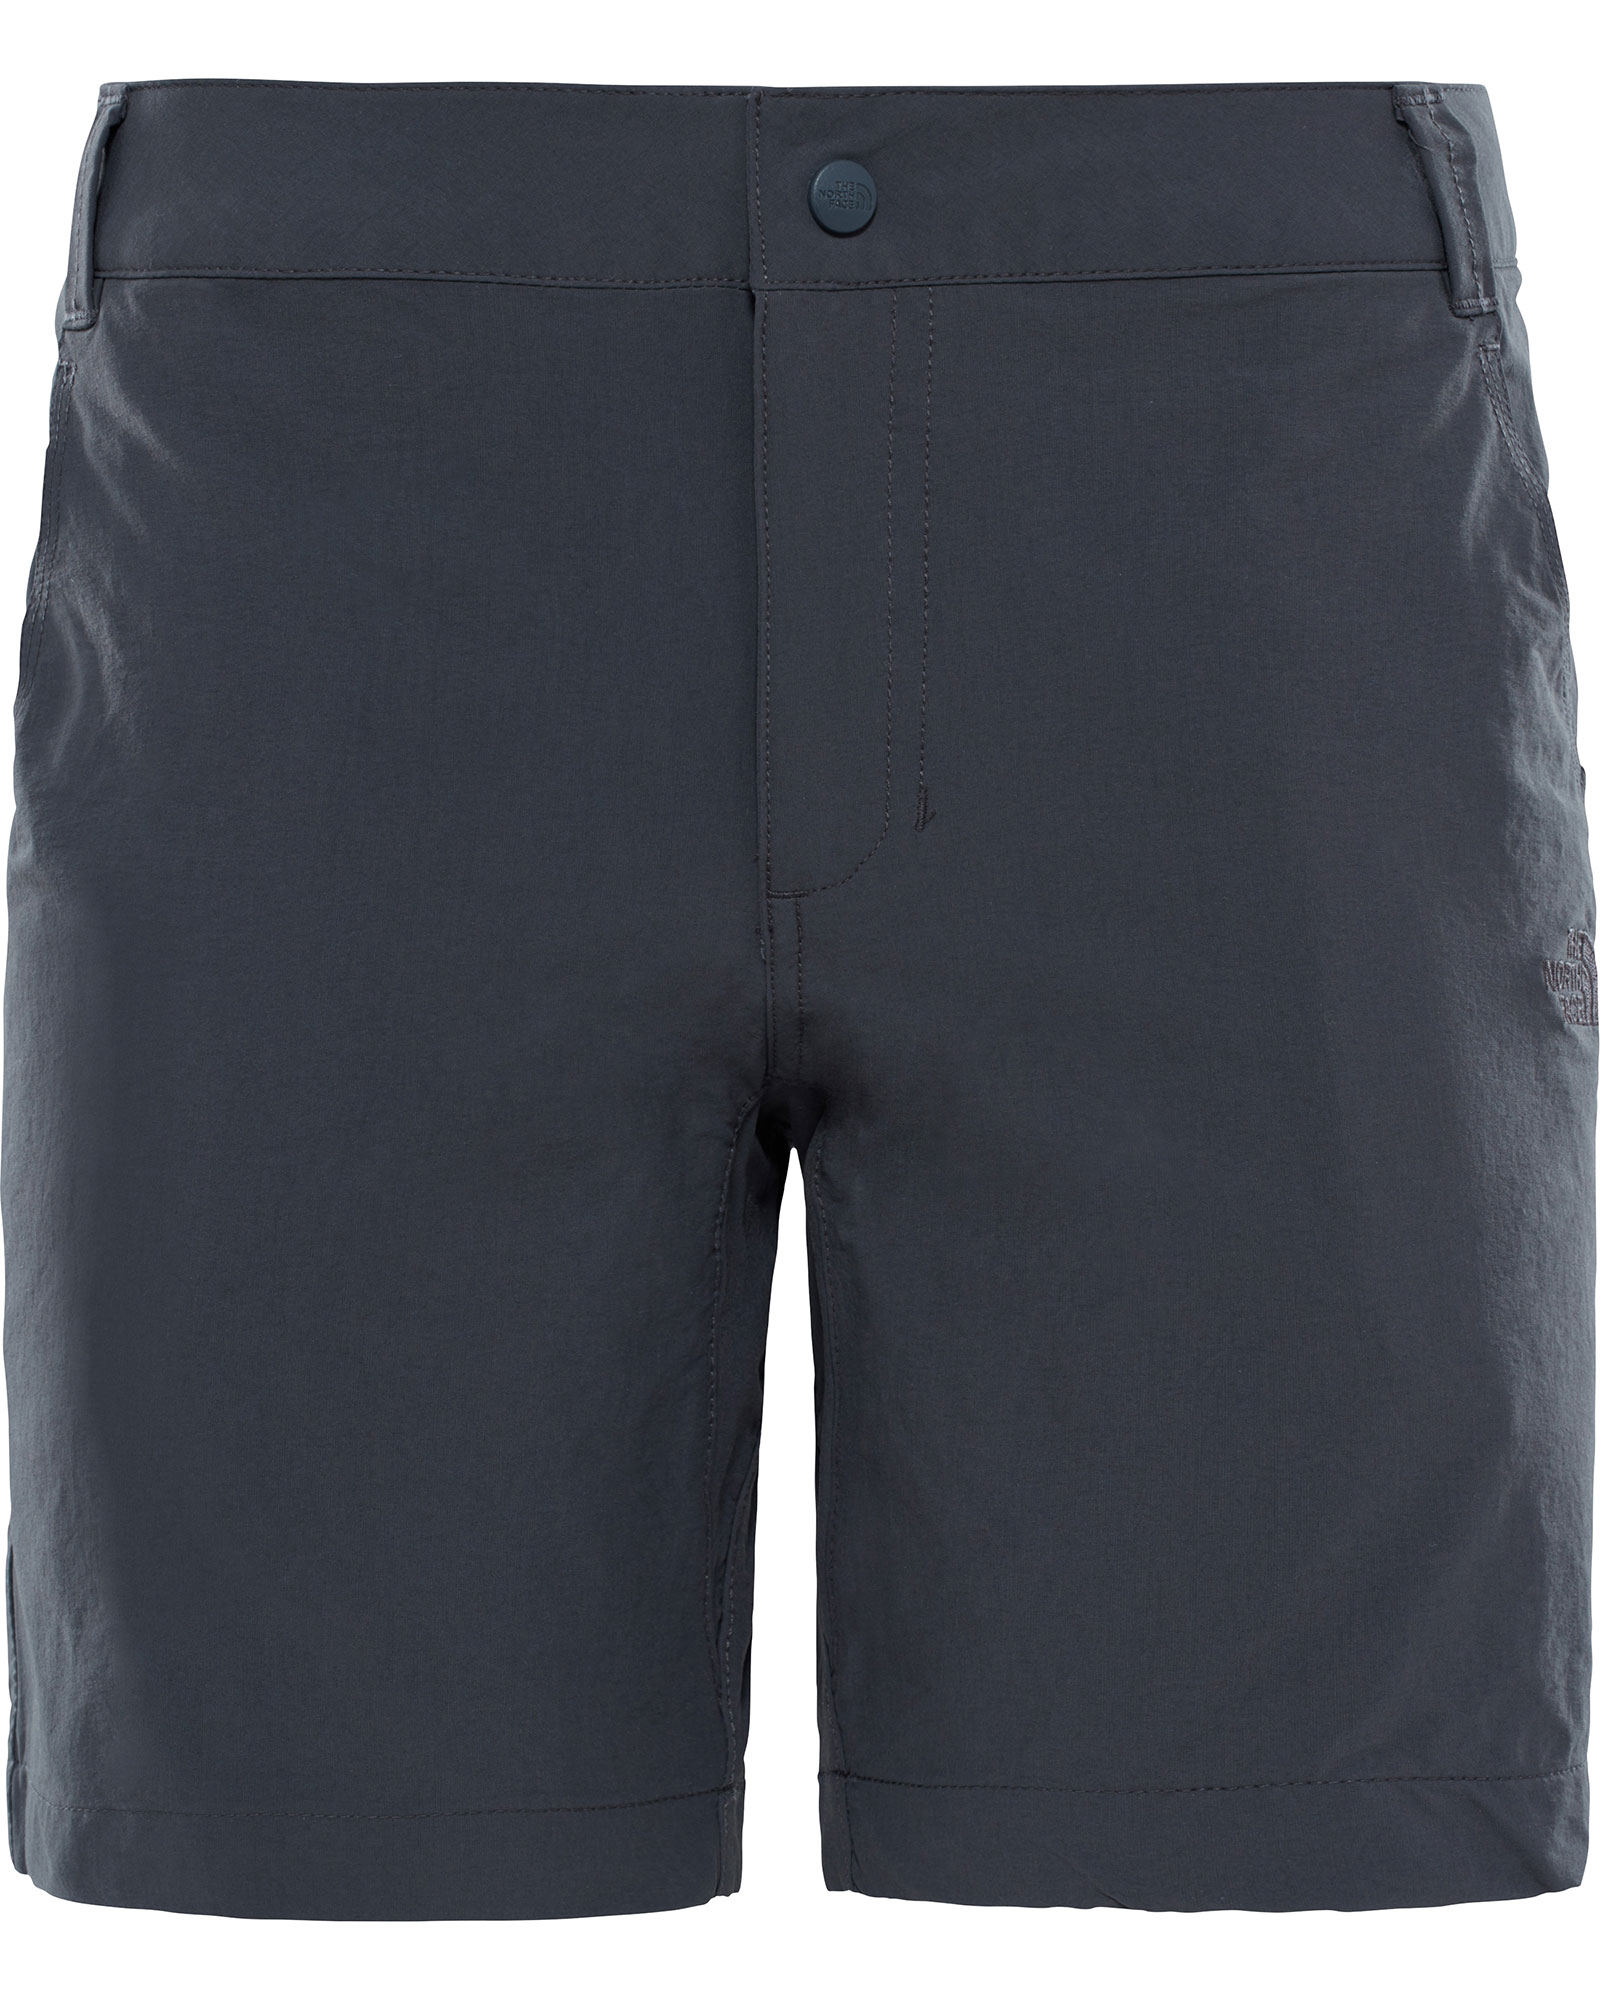 The North Face Women's Exploration Shorts